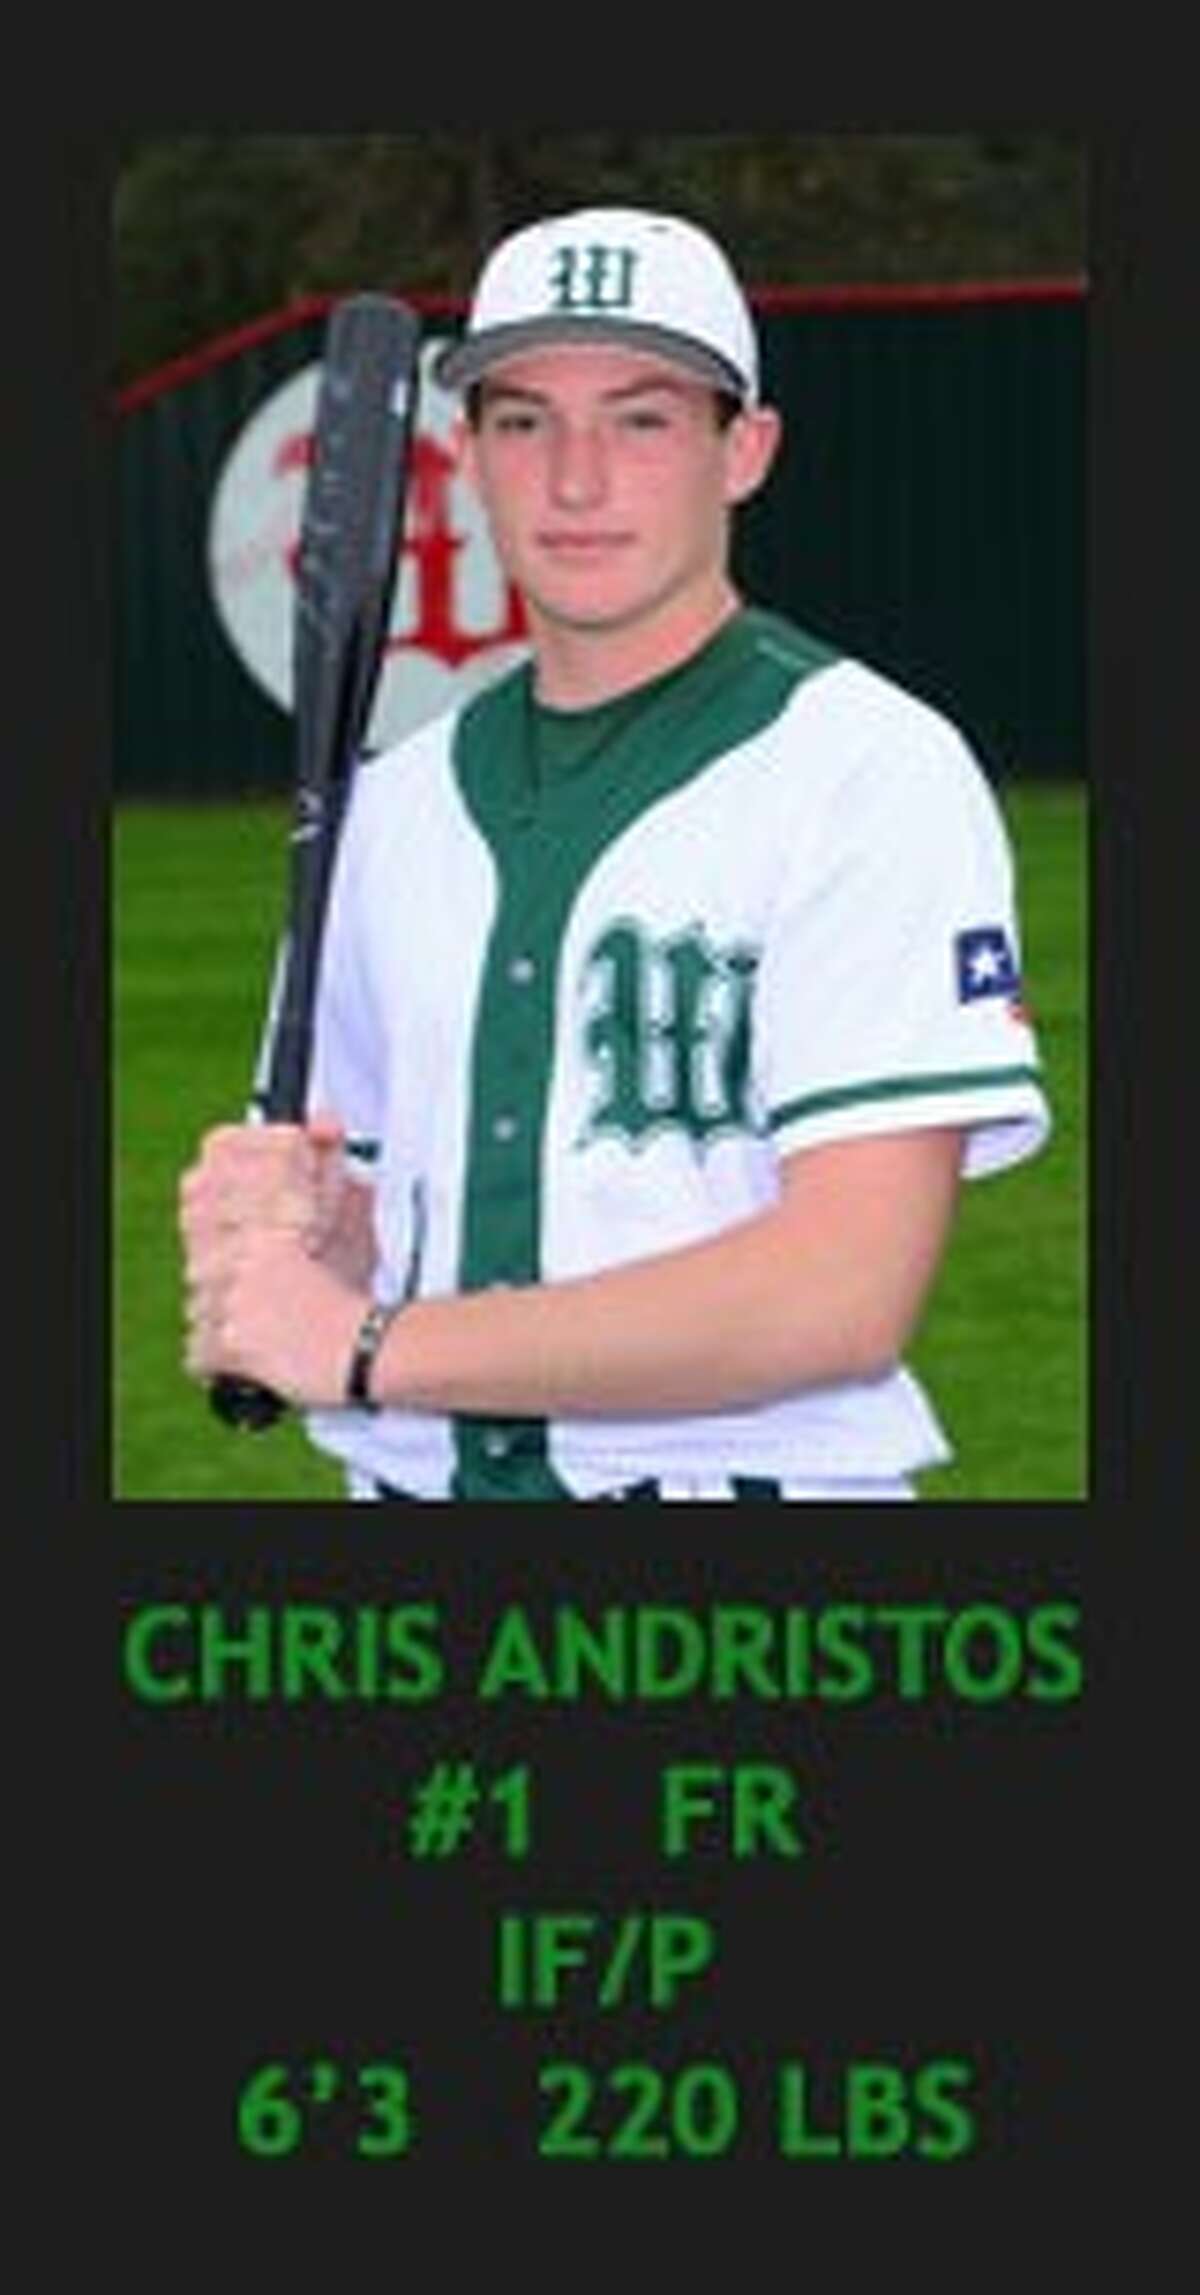 Chris Andritsos has hit four home runs in 10 games.